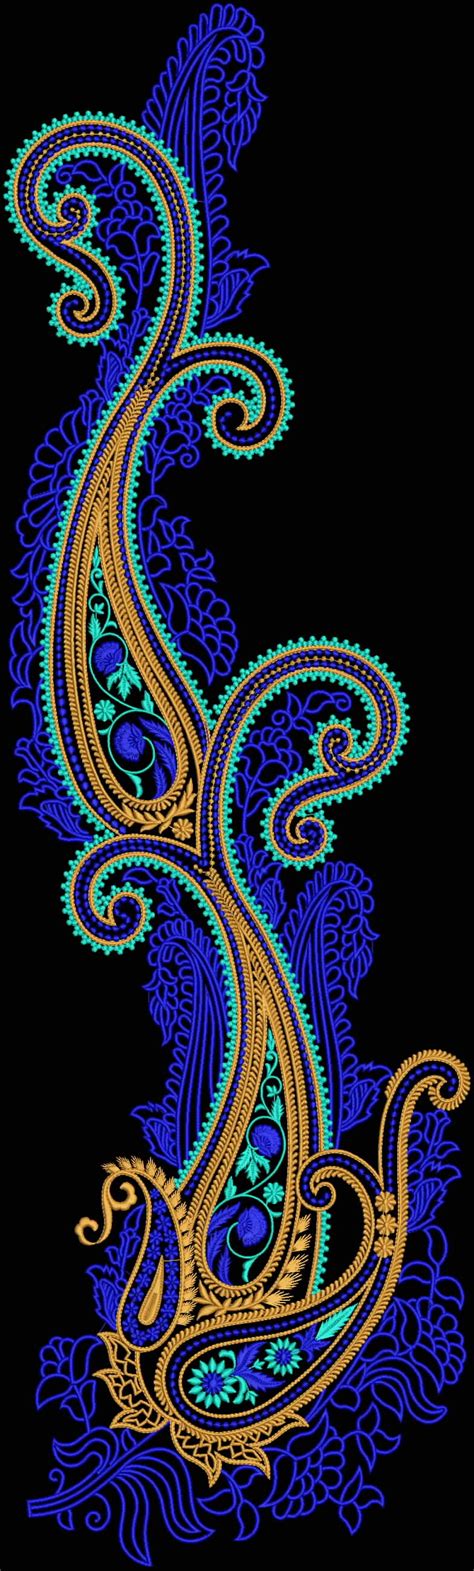 Latest Embroidery Designs For Sale If U Want Embroidery Designs Plz